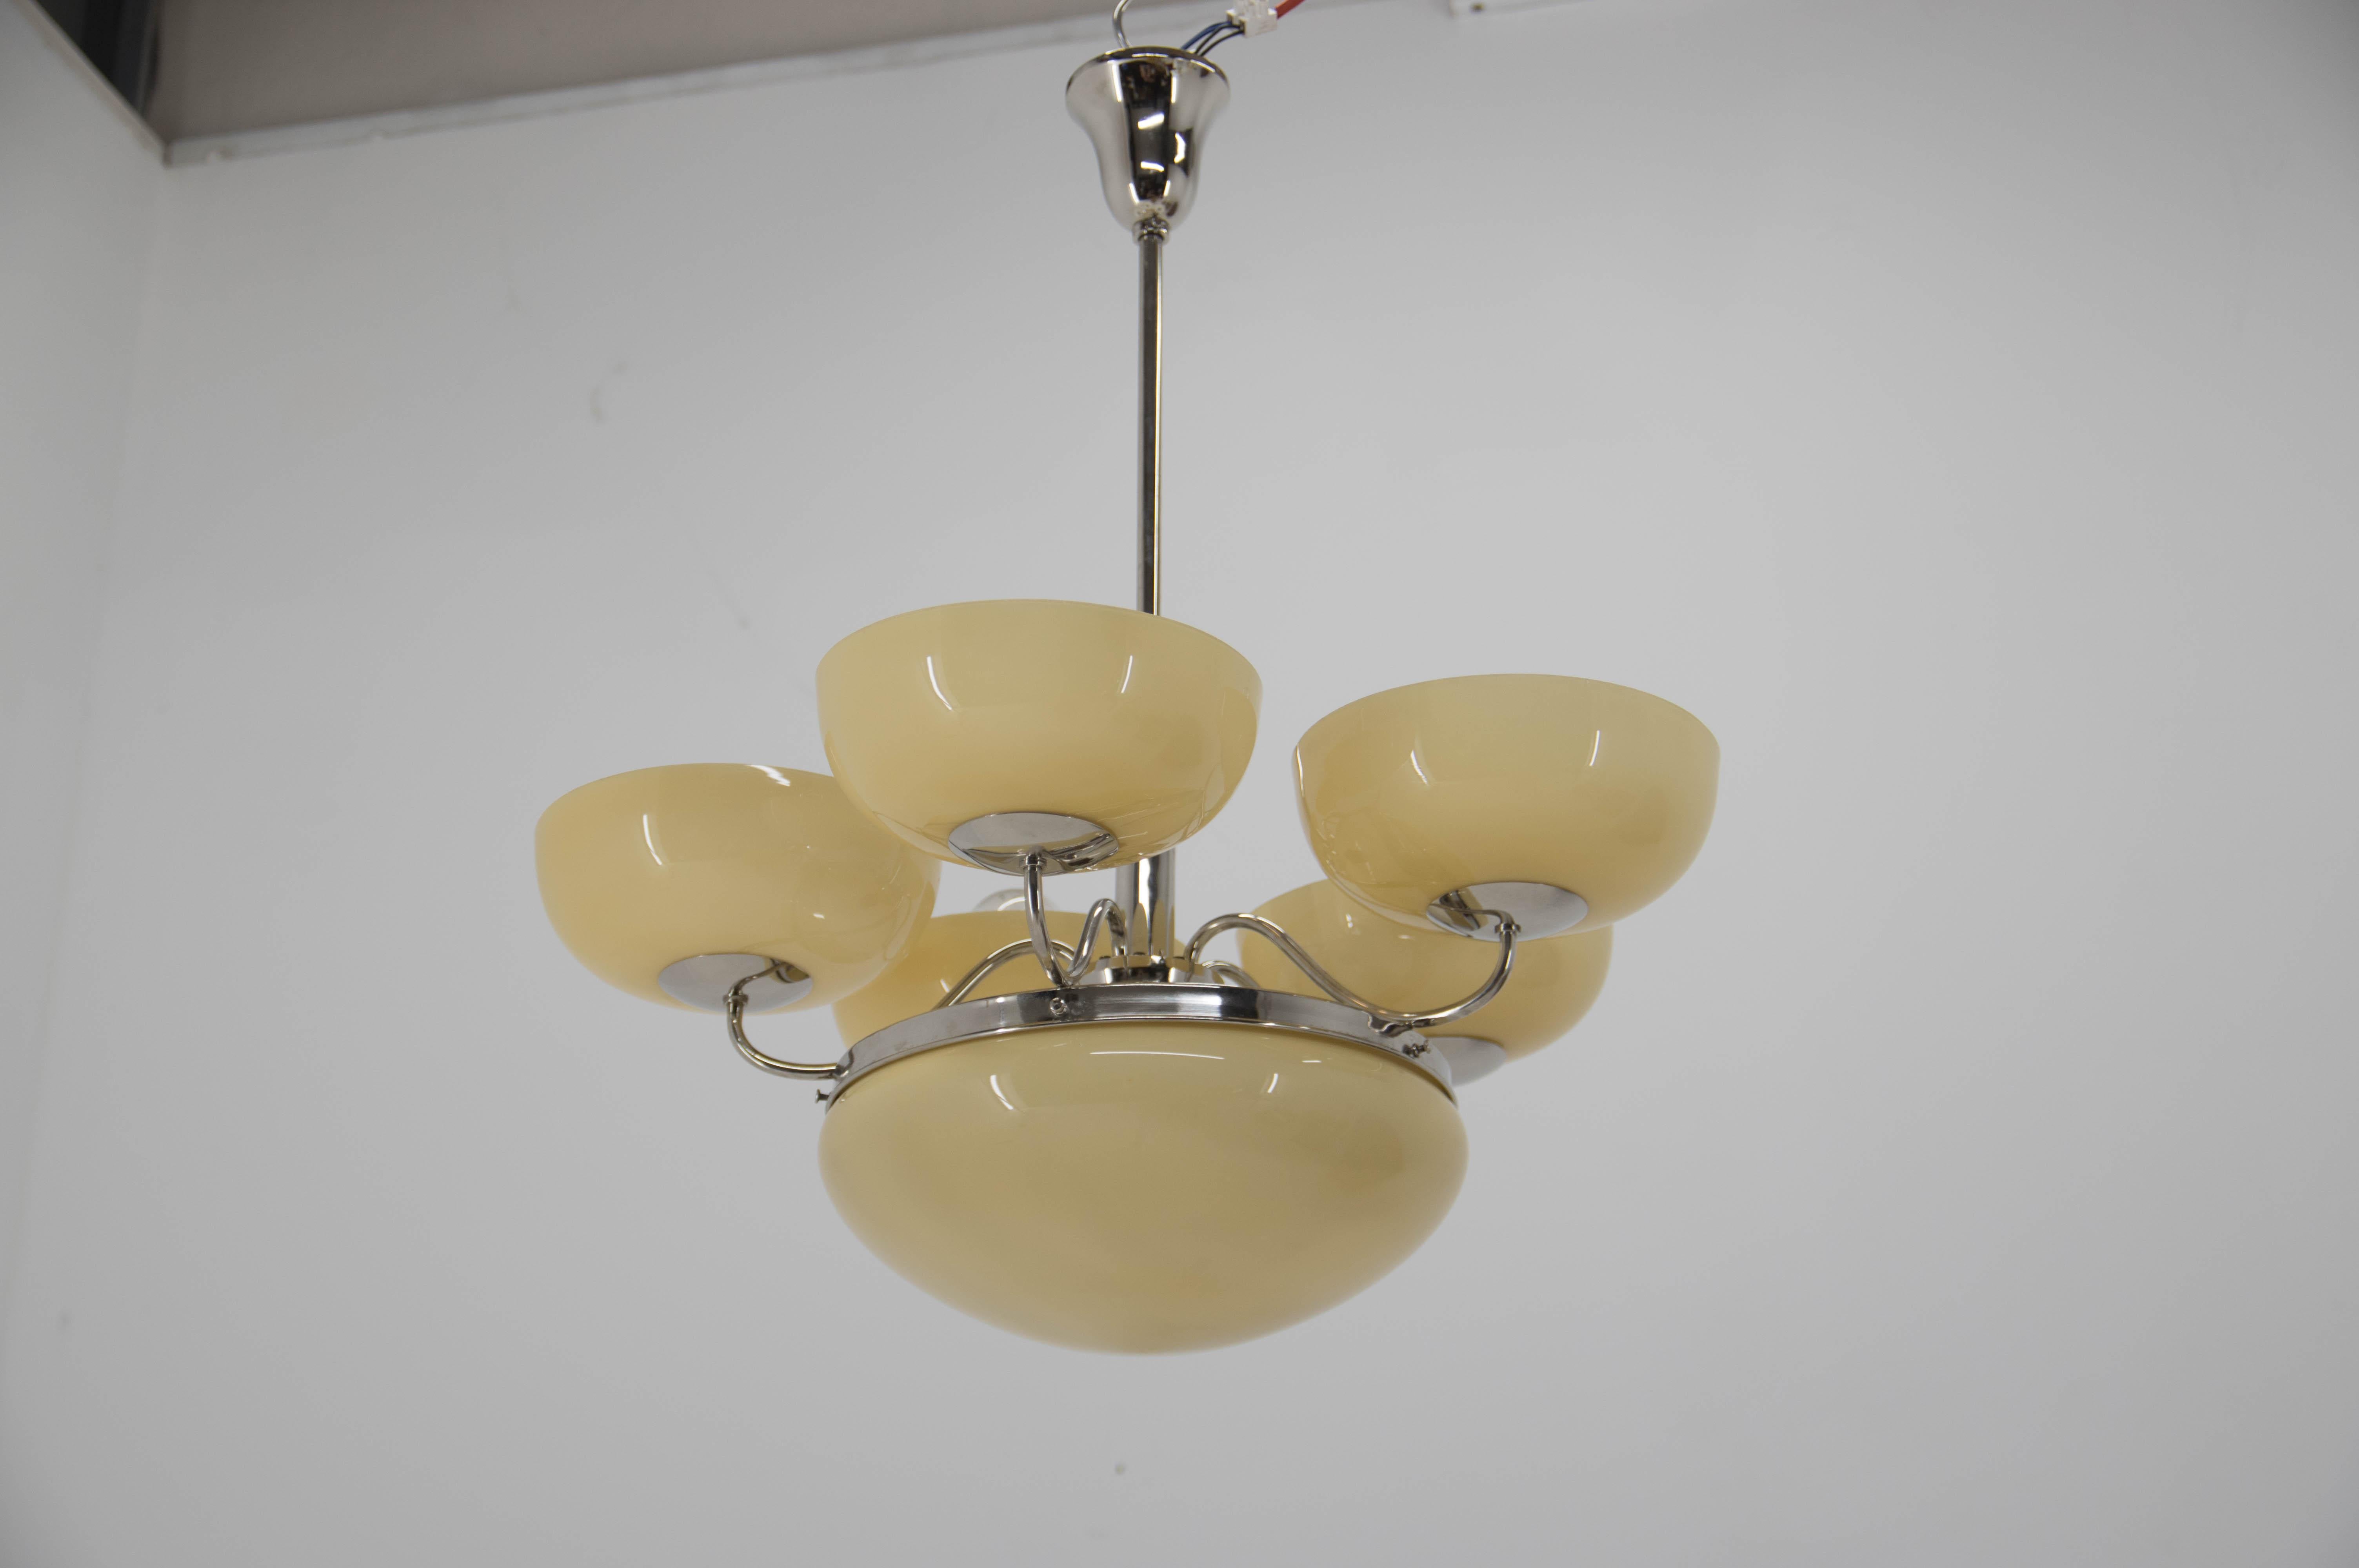 Large Art Deco Chandelier in Excellent Condition, 1930s For Sale 2